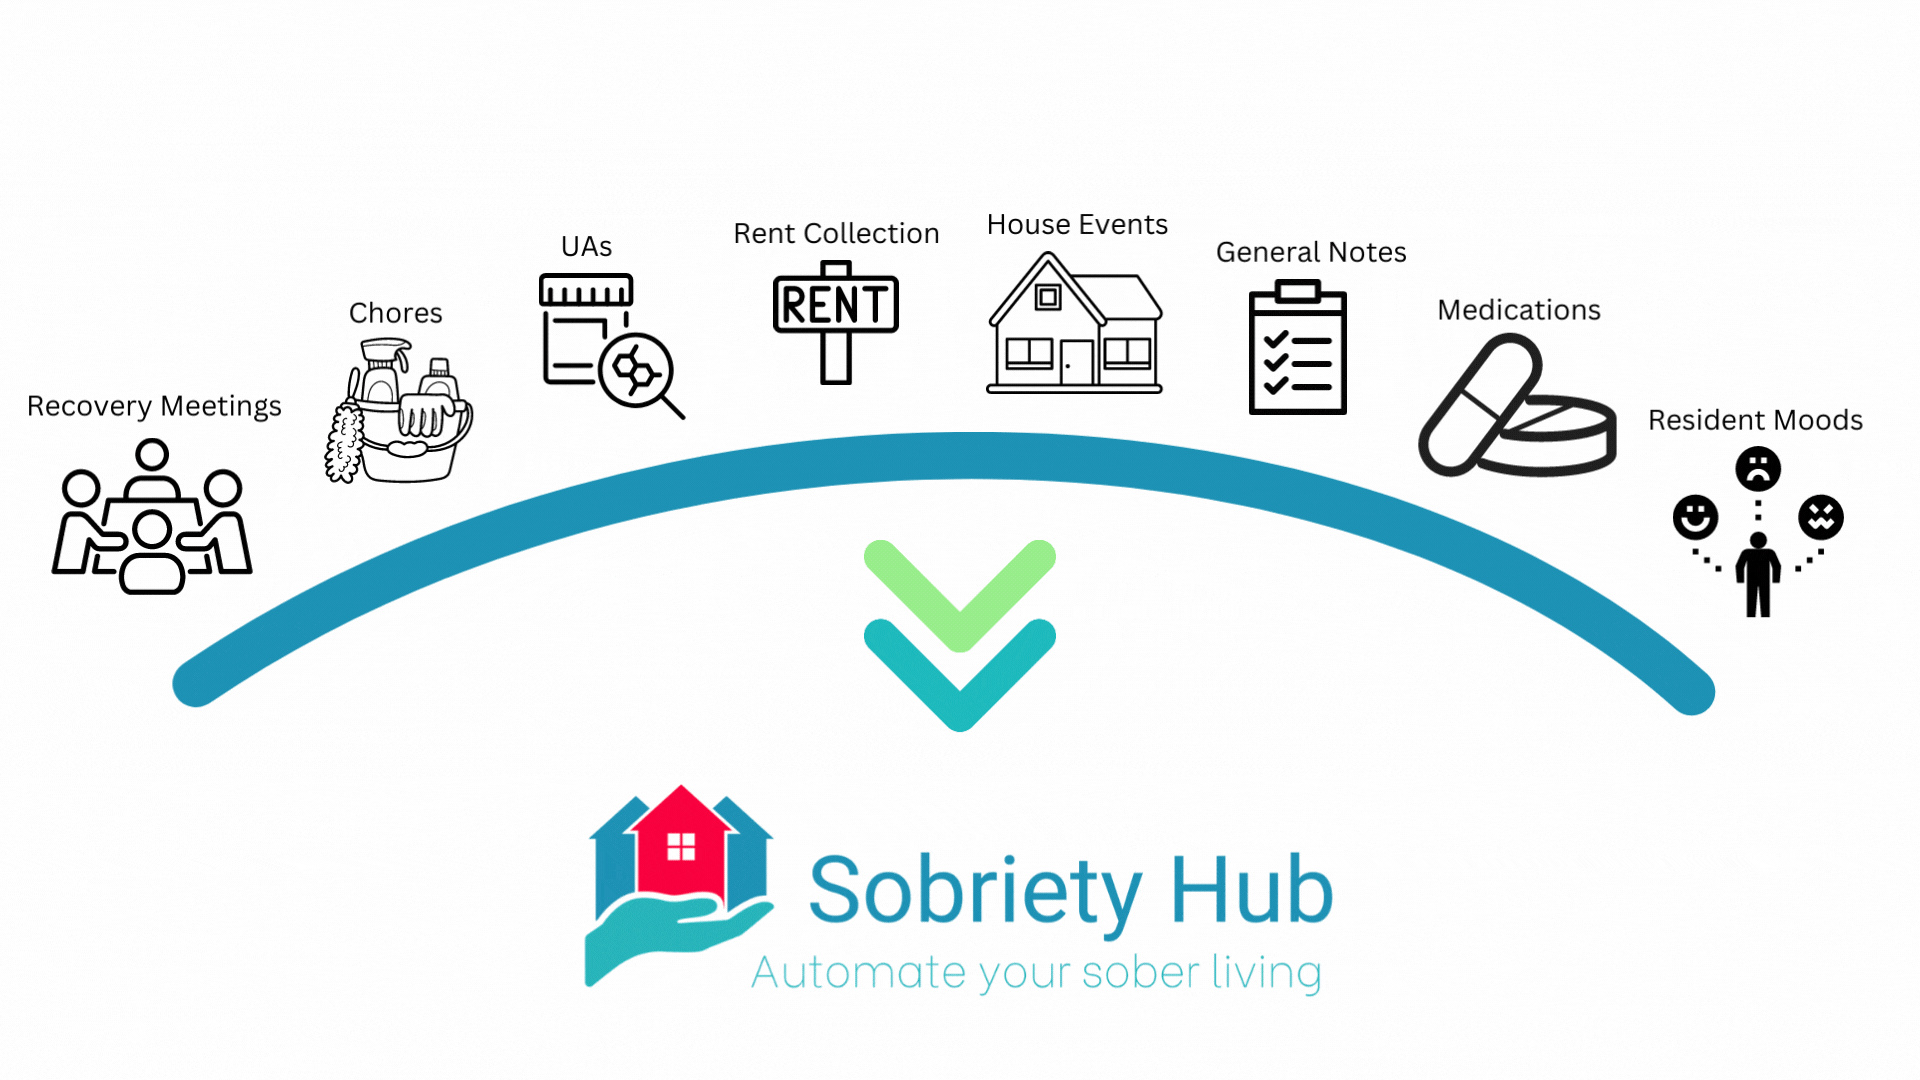 Sobriety Hub helps recovery residences track Recovery Meetings, Chores, Drug Tests, Rent Collection, House Events, General Notes, Medications, and Resident Moods all collected in the Sobriety Hub App platform